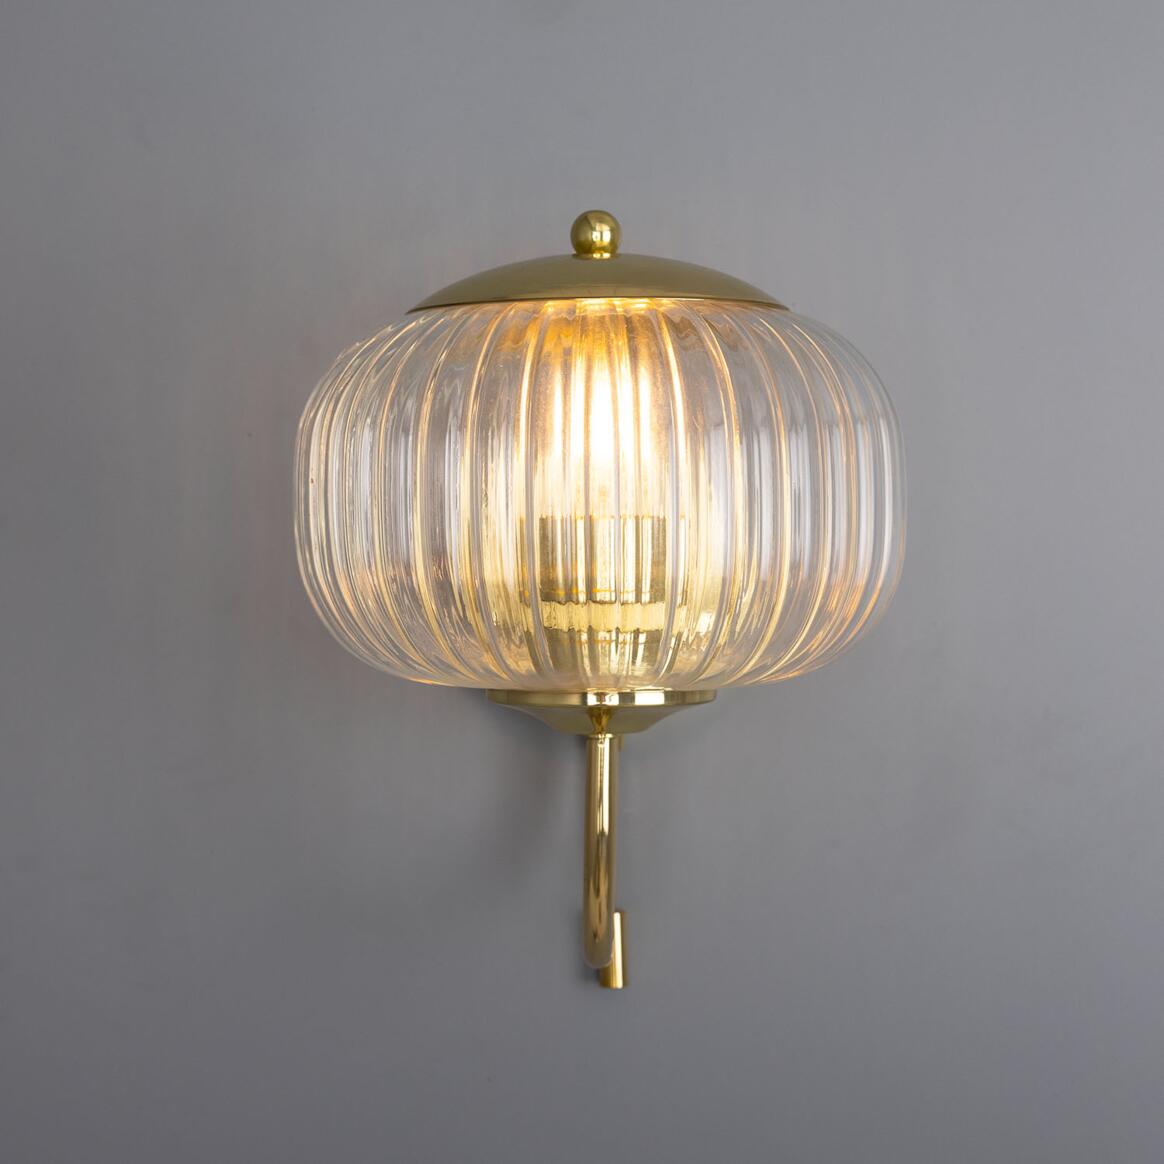 Ursula Wall Light In Brass With A Black Hood